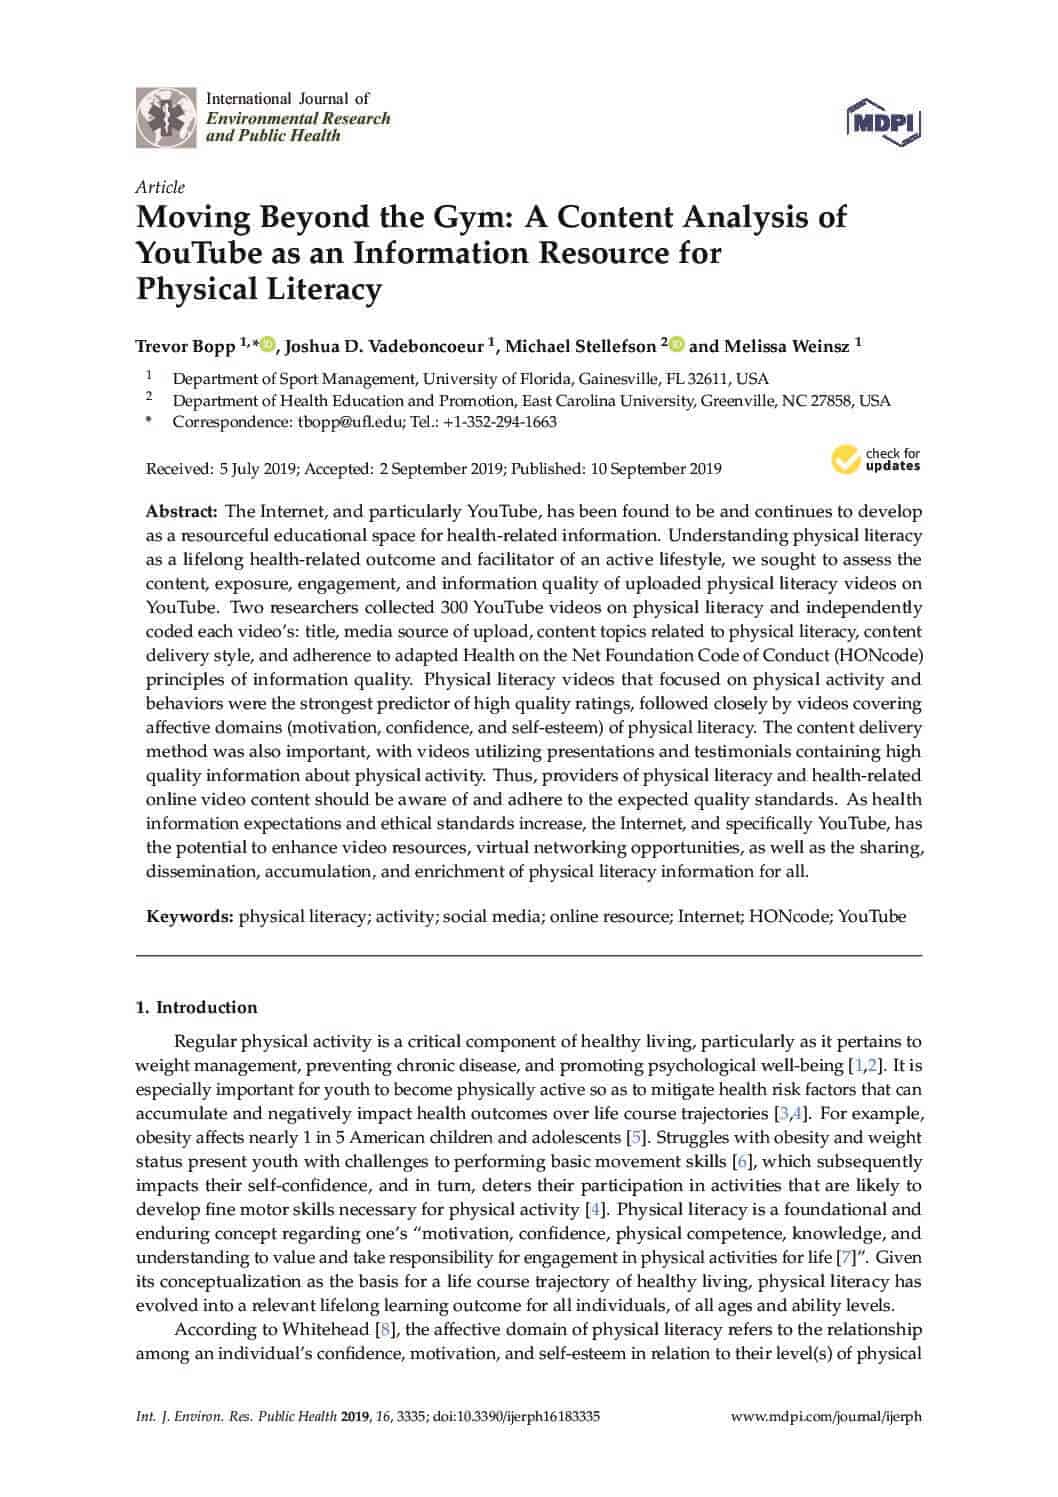 Moving Beyond the Gym: A Content Analysis of YouTube as an Information Resource for Physical Literacy